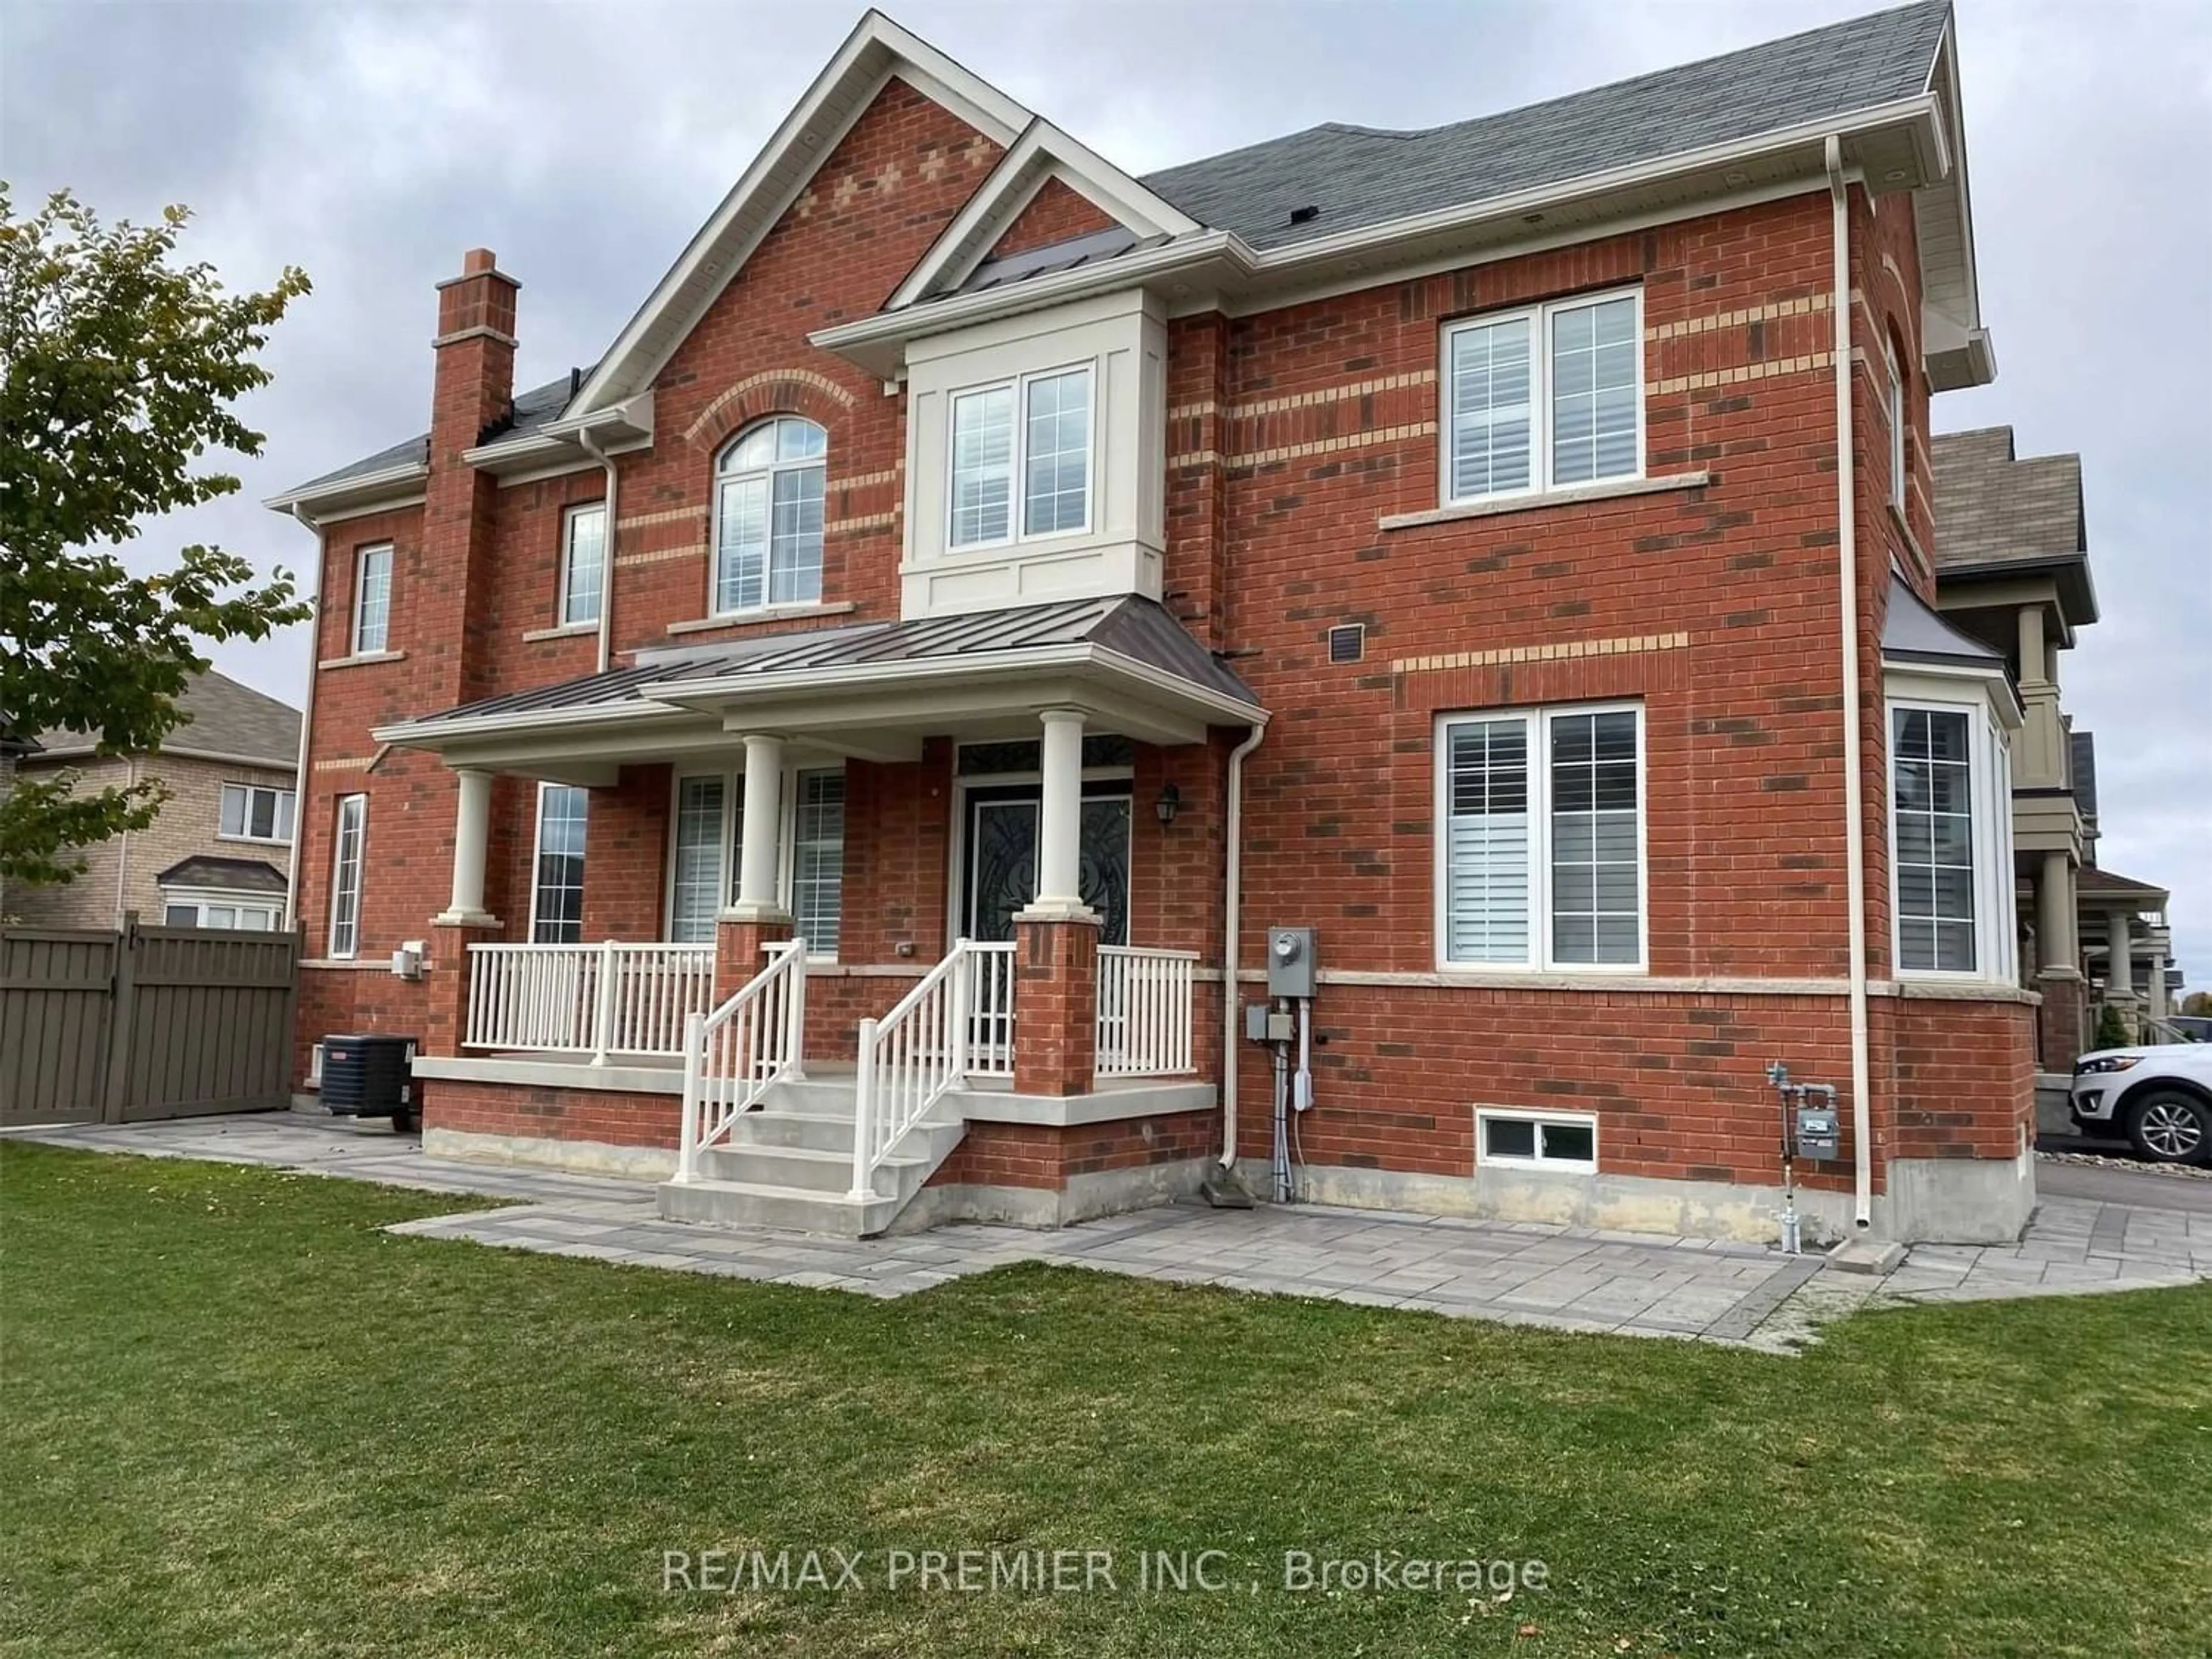 Home with brick exterior material for 31 Cranbrook Cres, Vaughan Ontario L4H 4H2